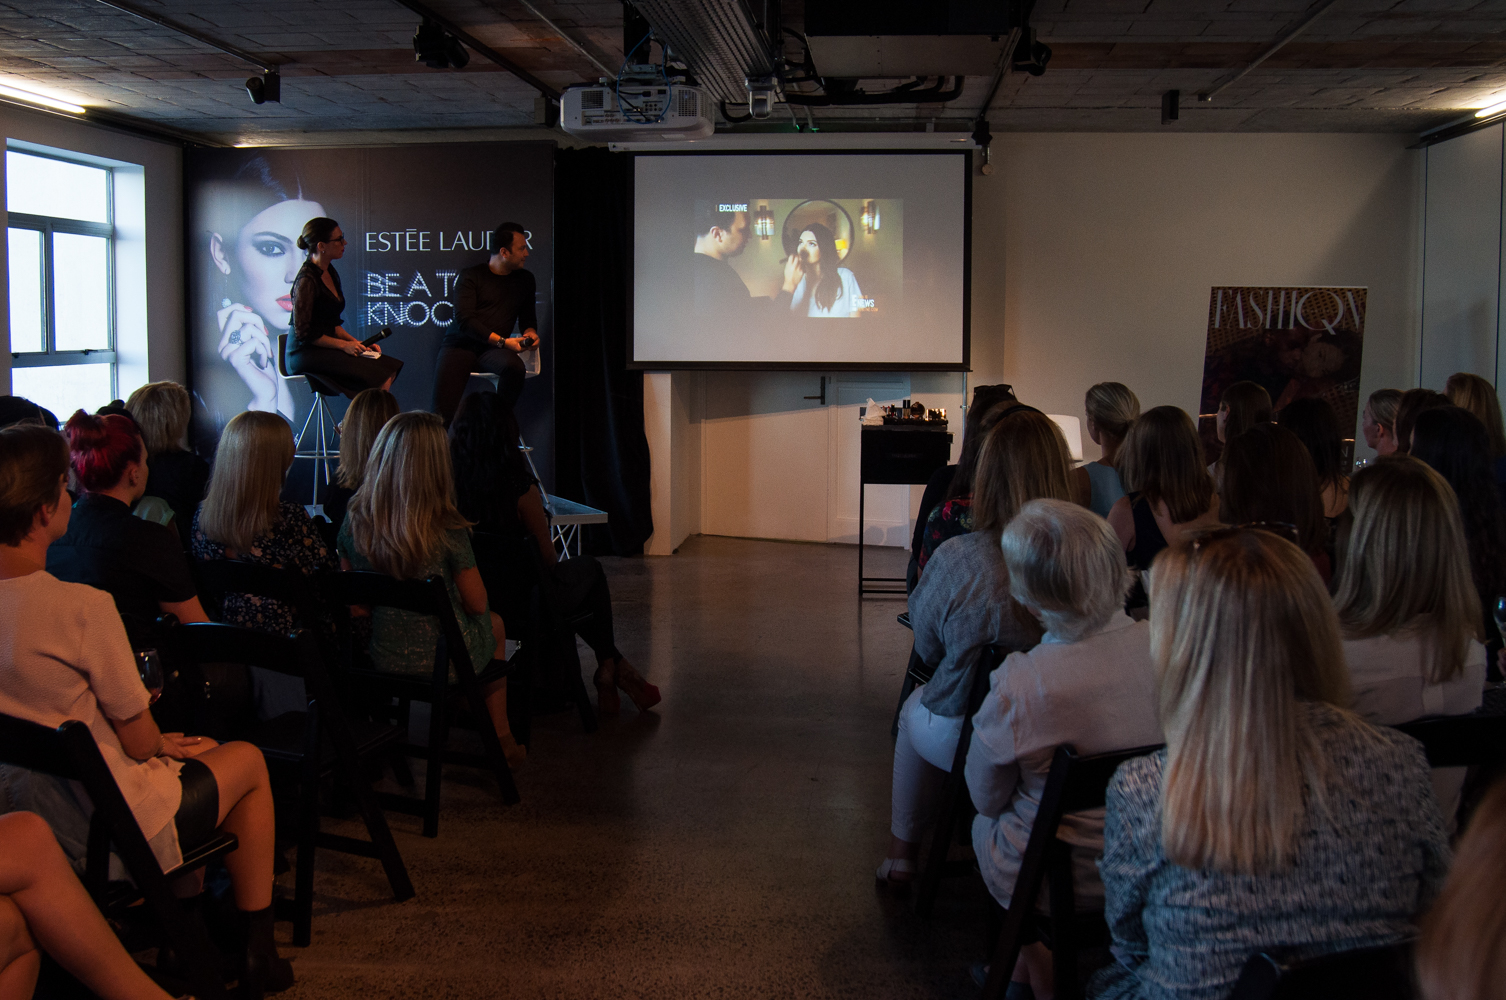 Victor showed the audience a video demonstrating the phenomenal year he's had since coming on board with Estée Lauder.